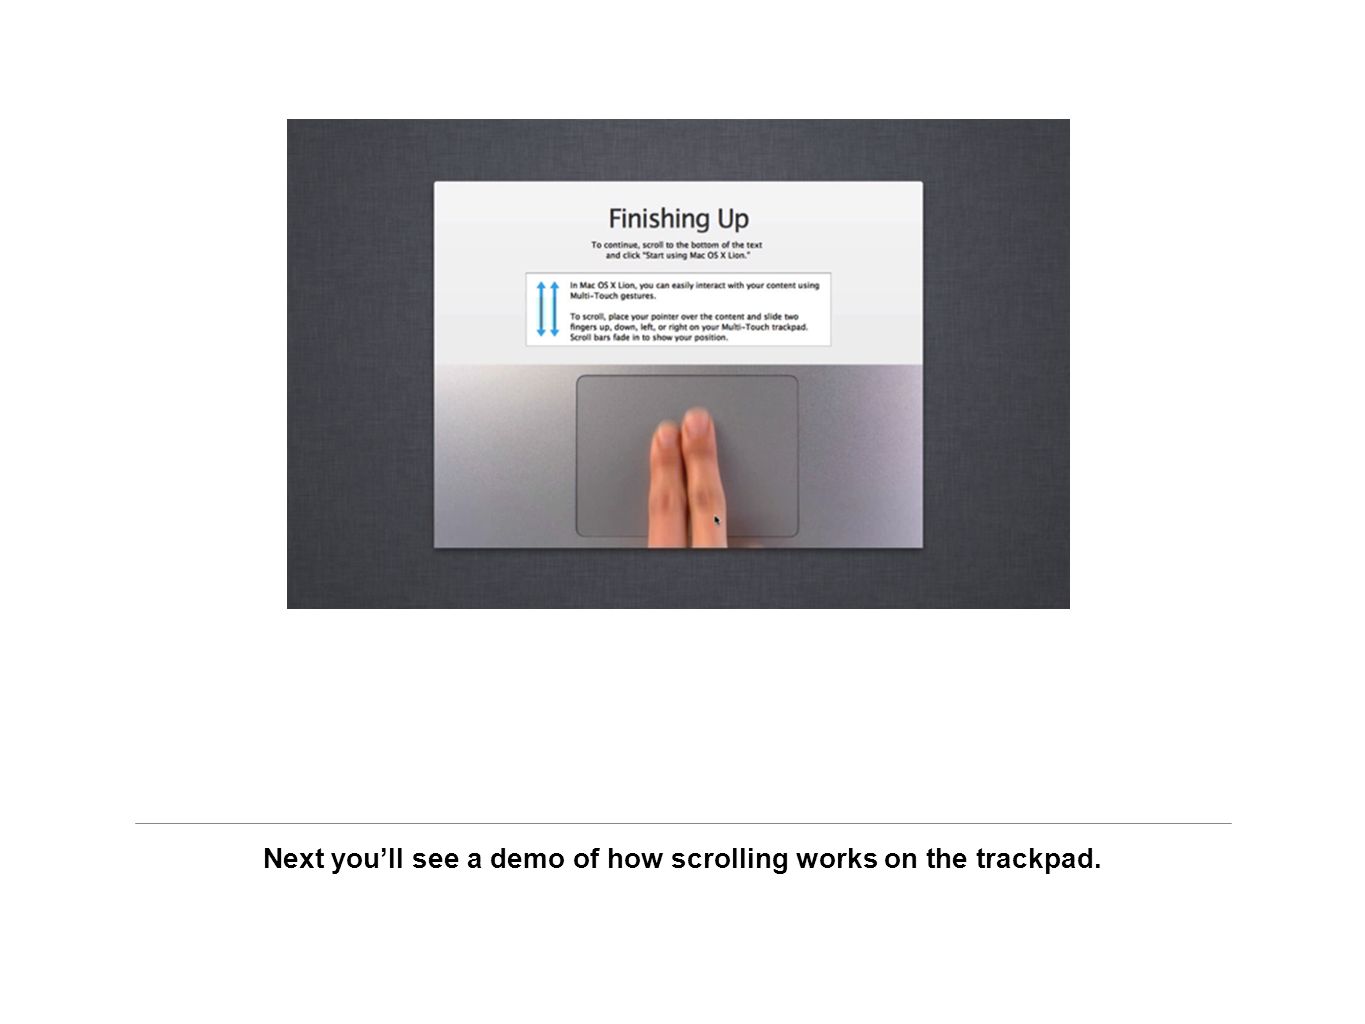 Next you’ll see a demo of how scrolling works on the trackpad.